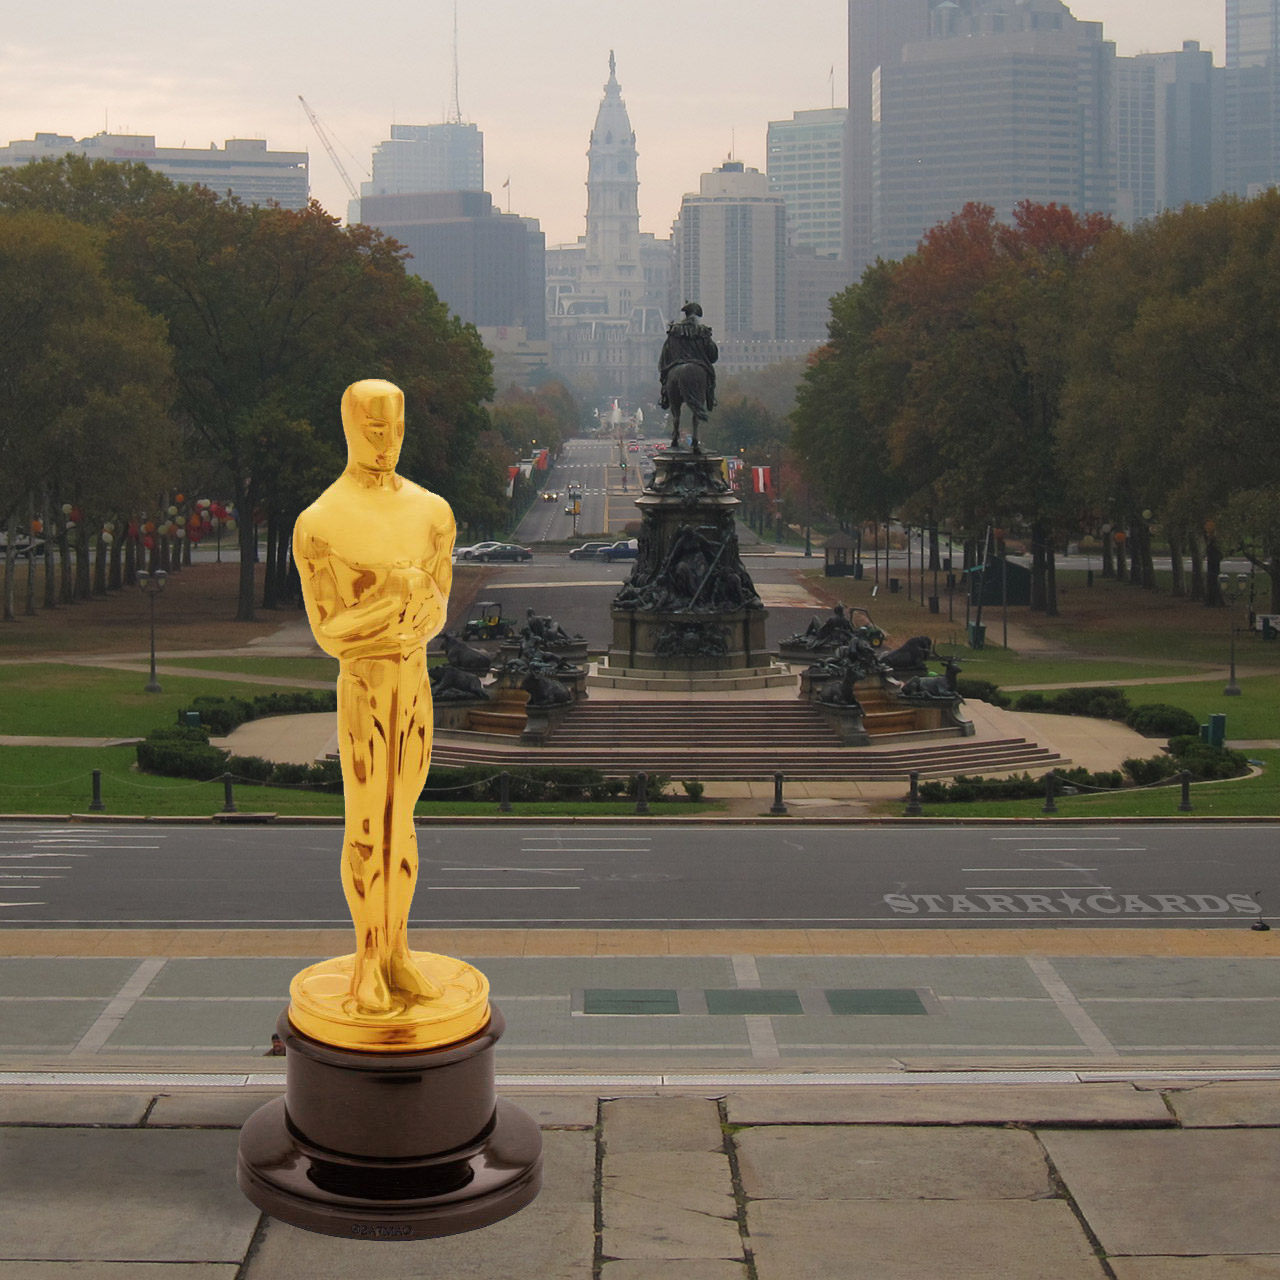 'Rocky' wins Oscar for Best Picture in 1977